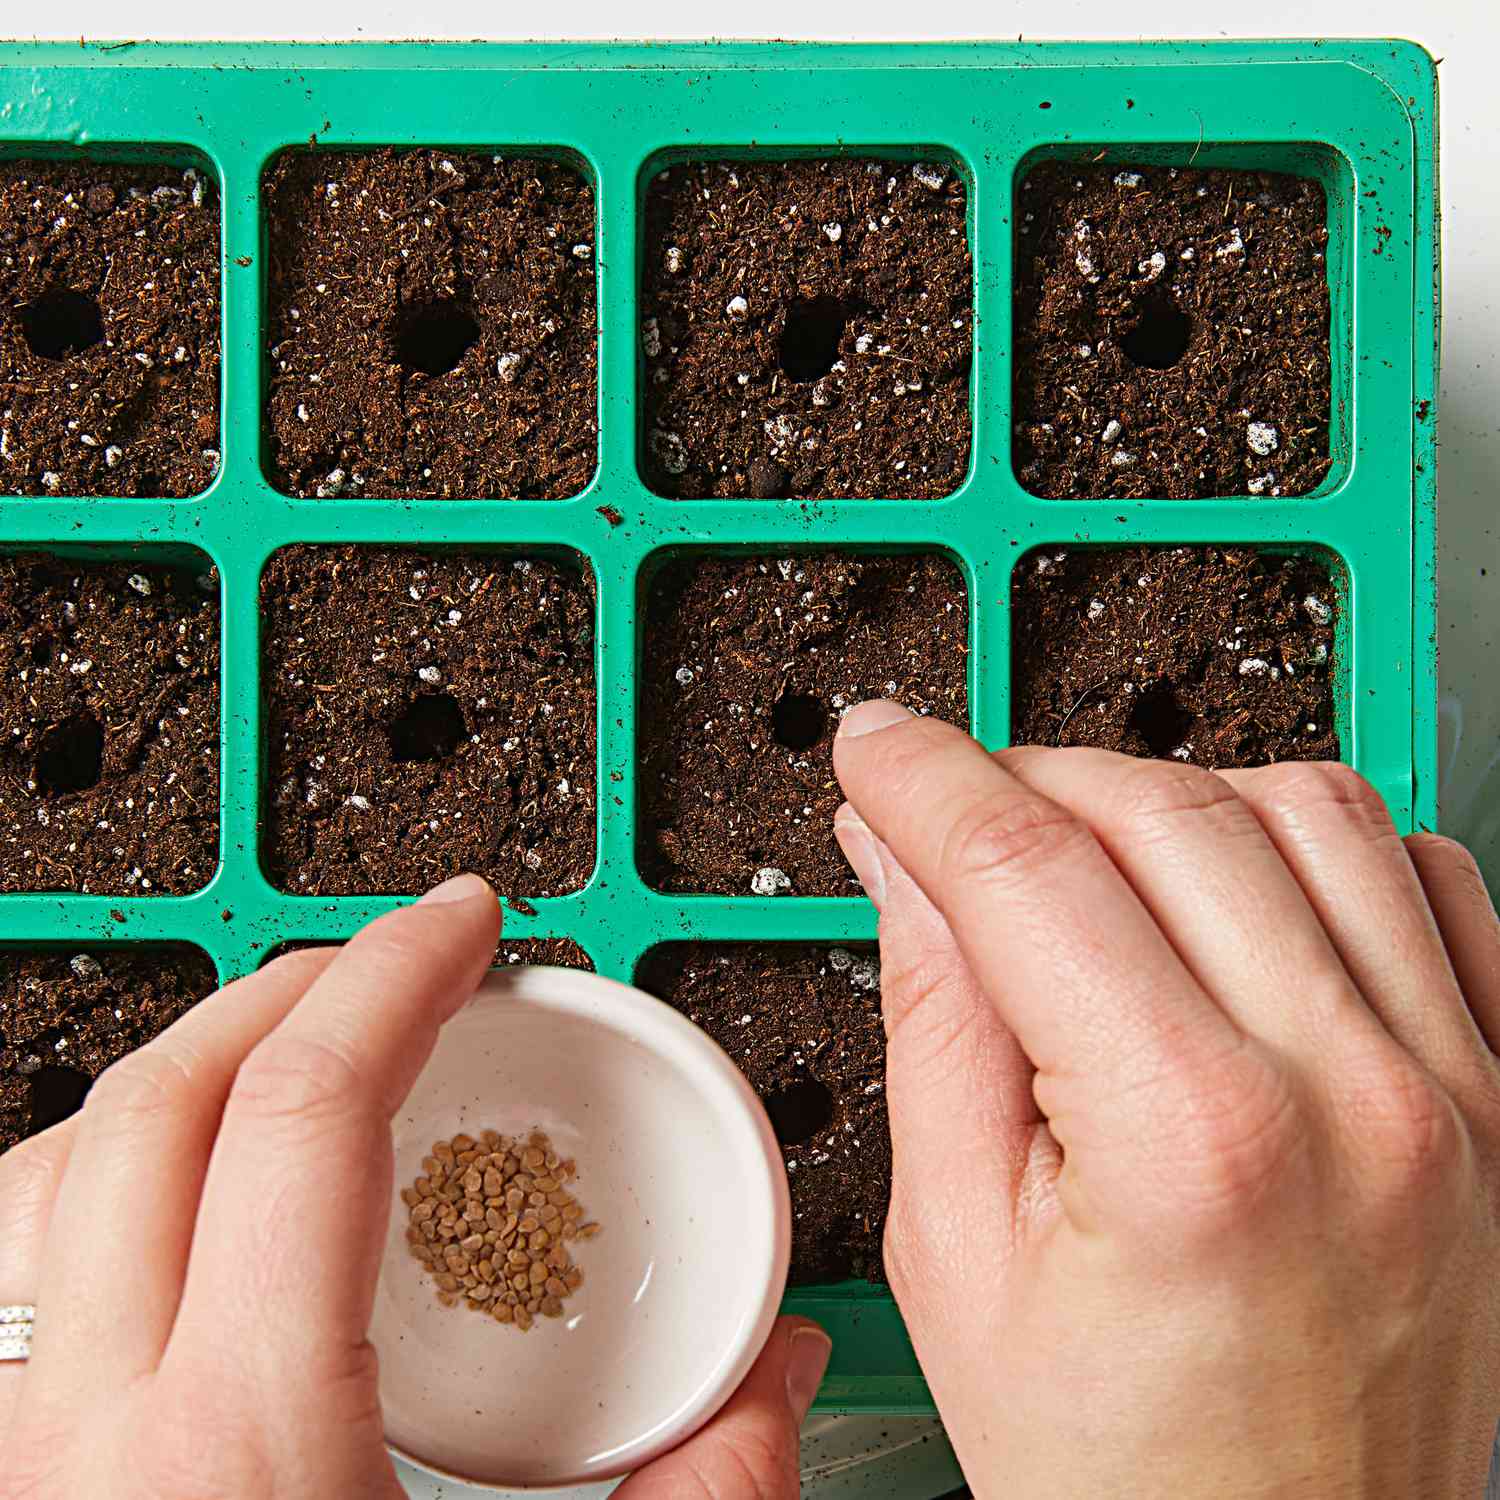 How to start seeds-Step 3